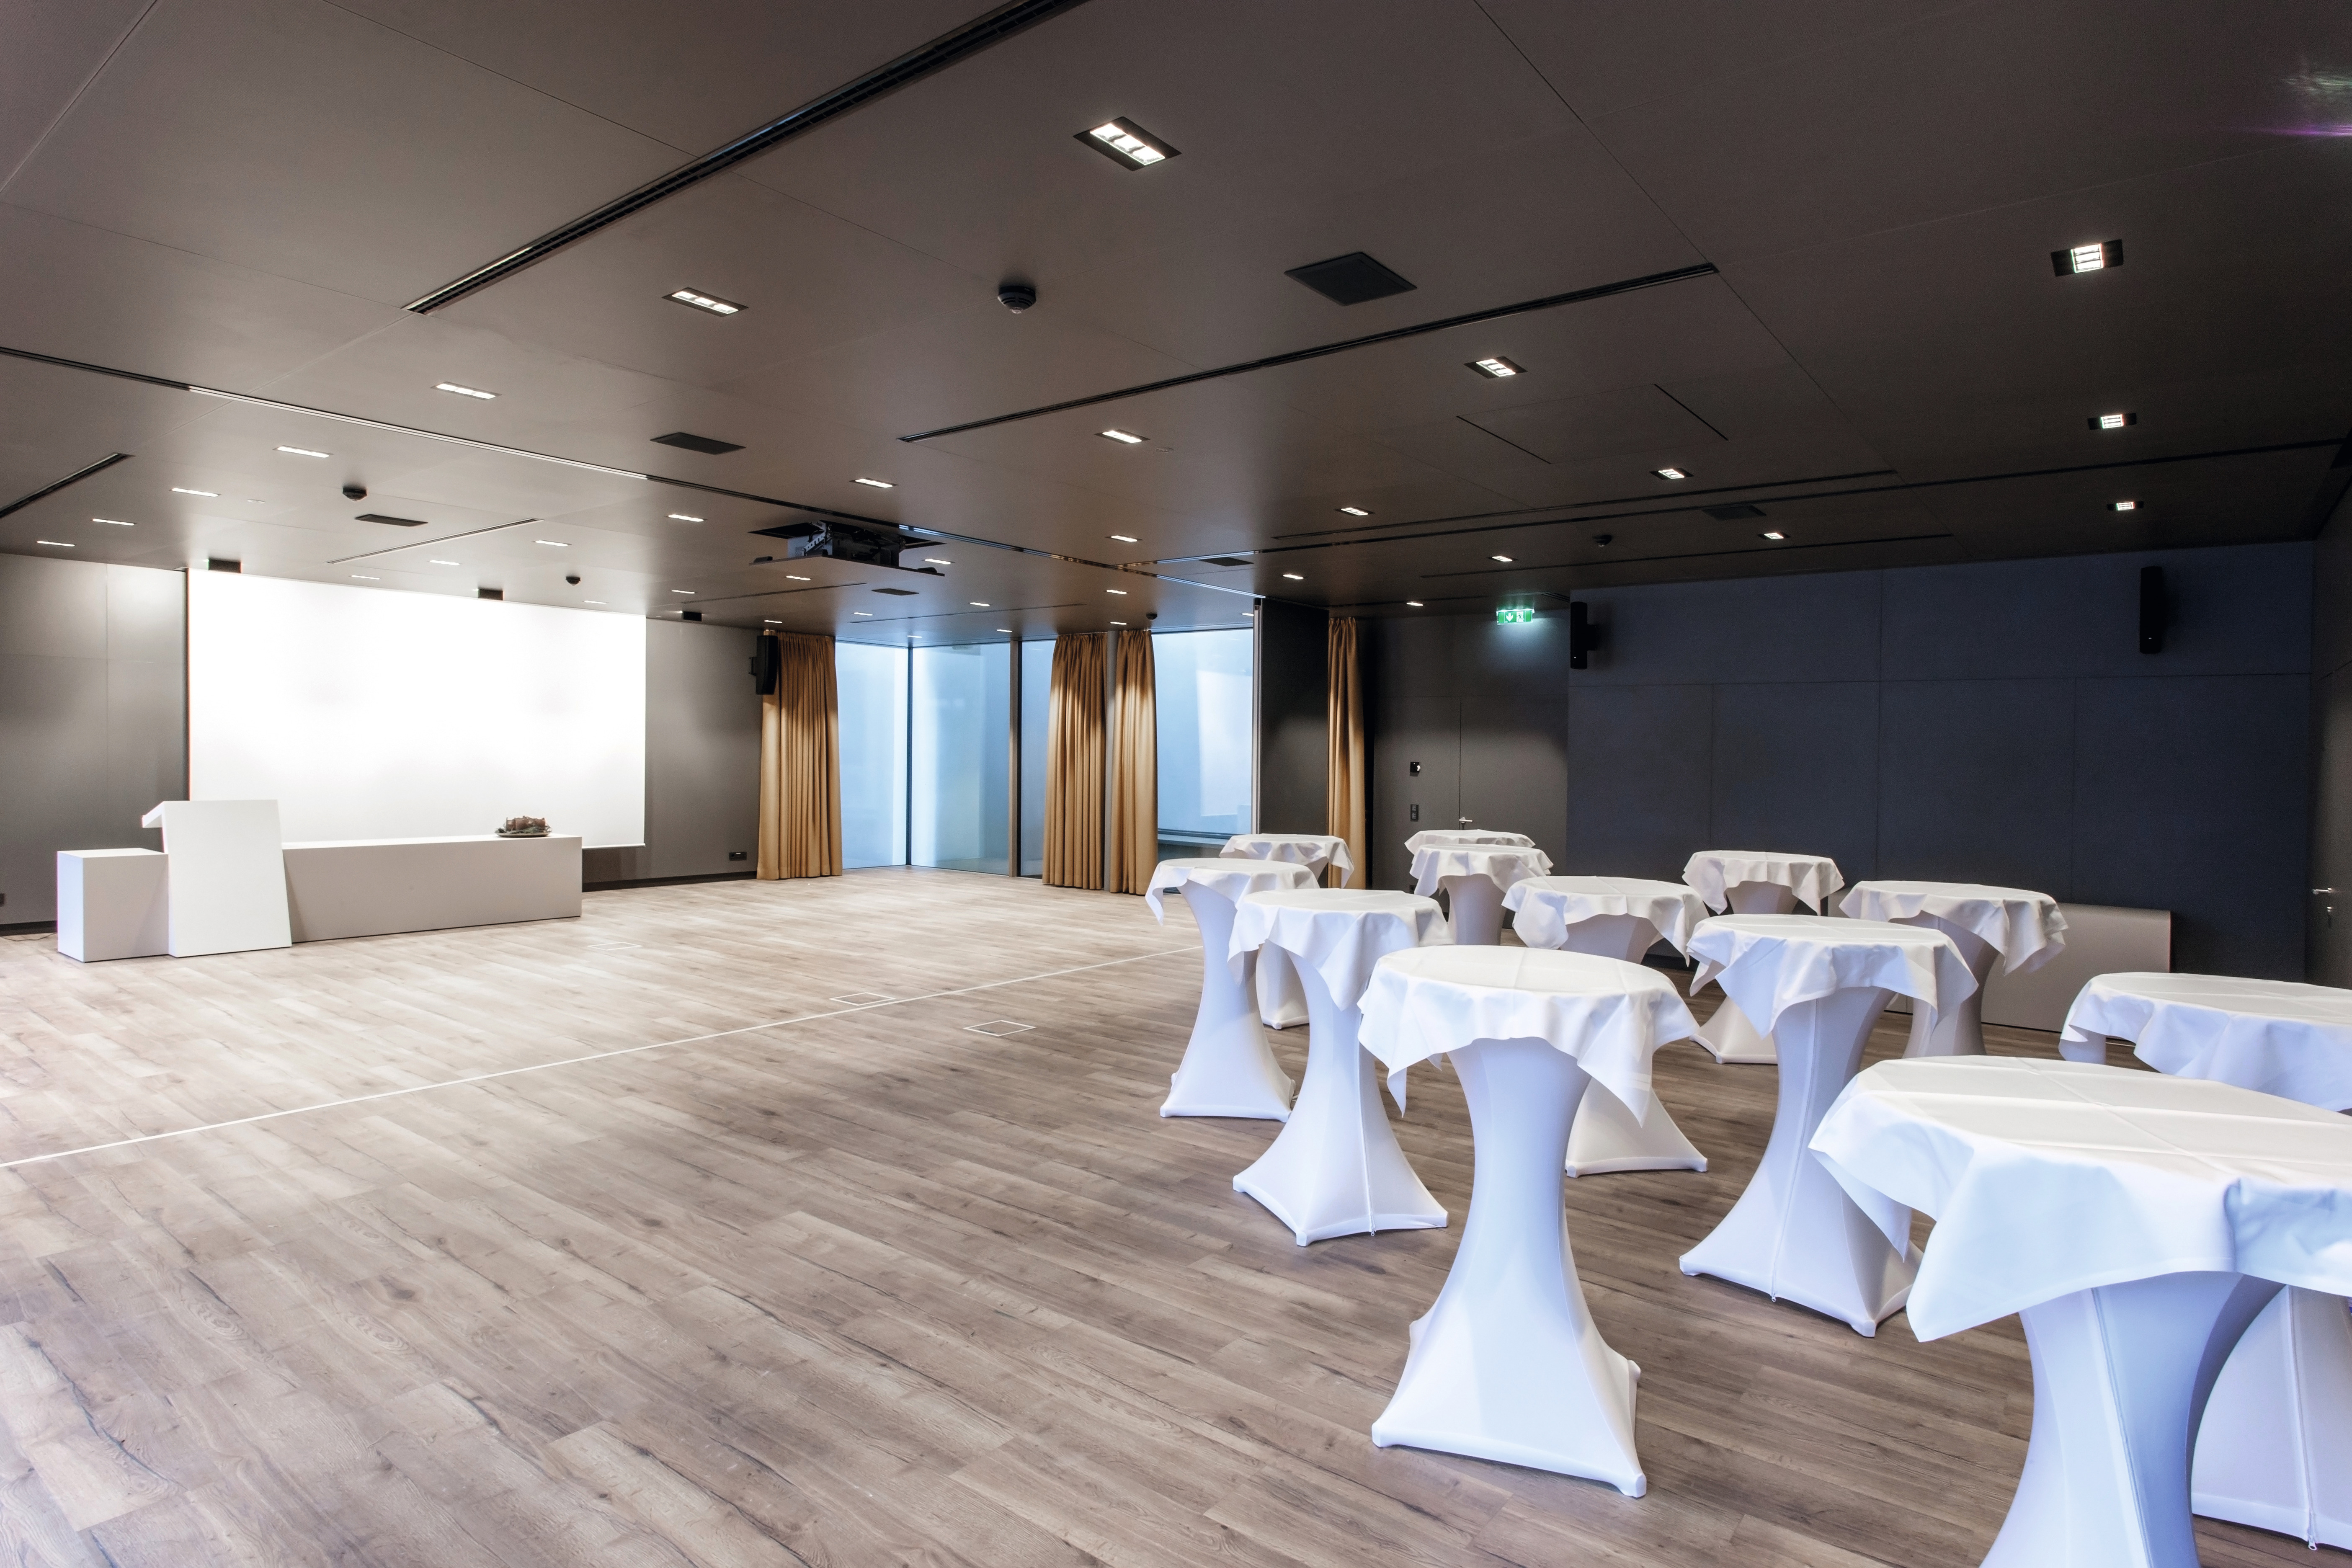 ProAcoustic was used in the ceiling elements in the conference room.